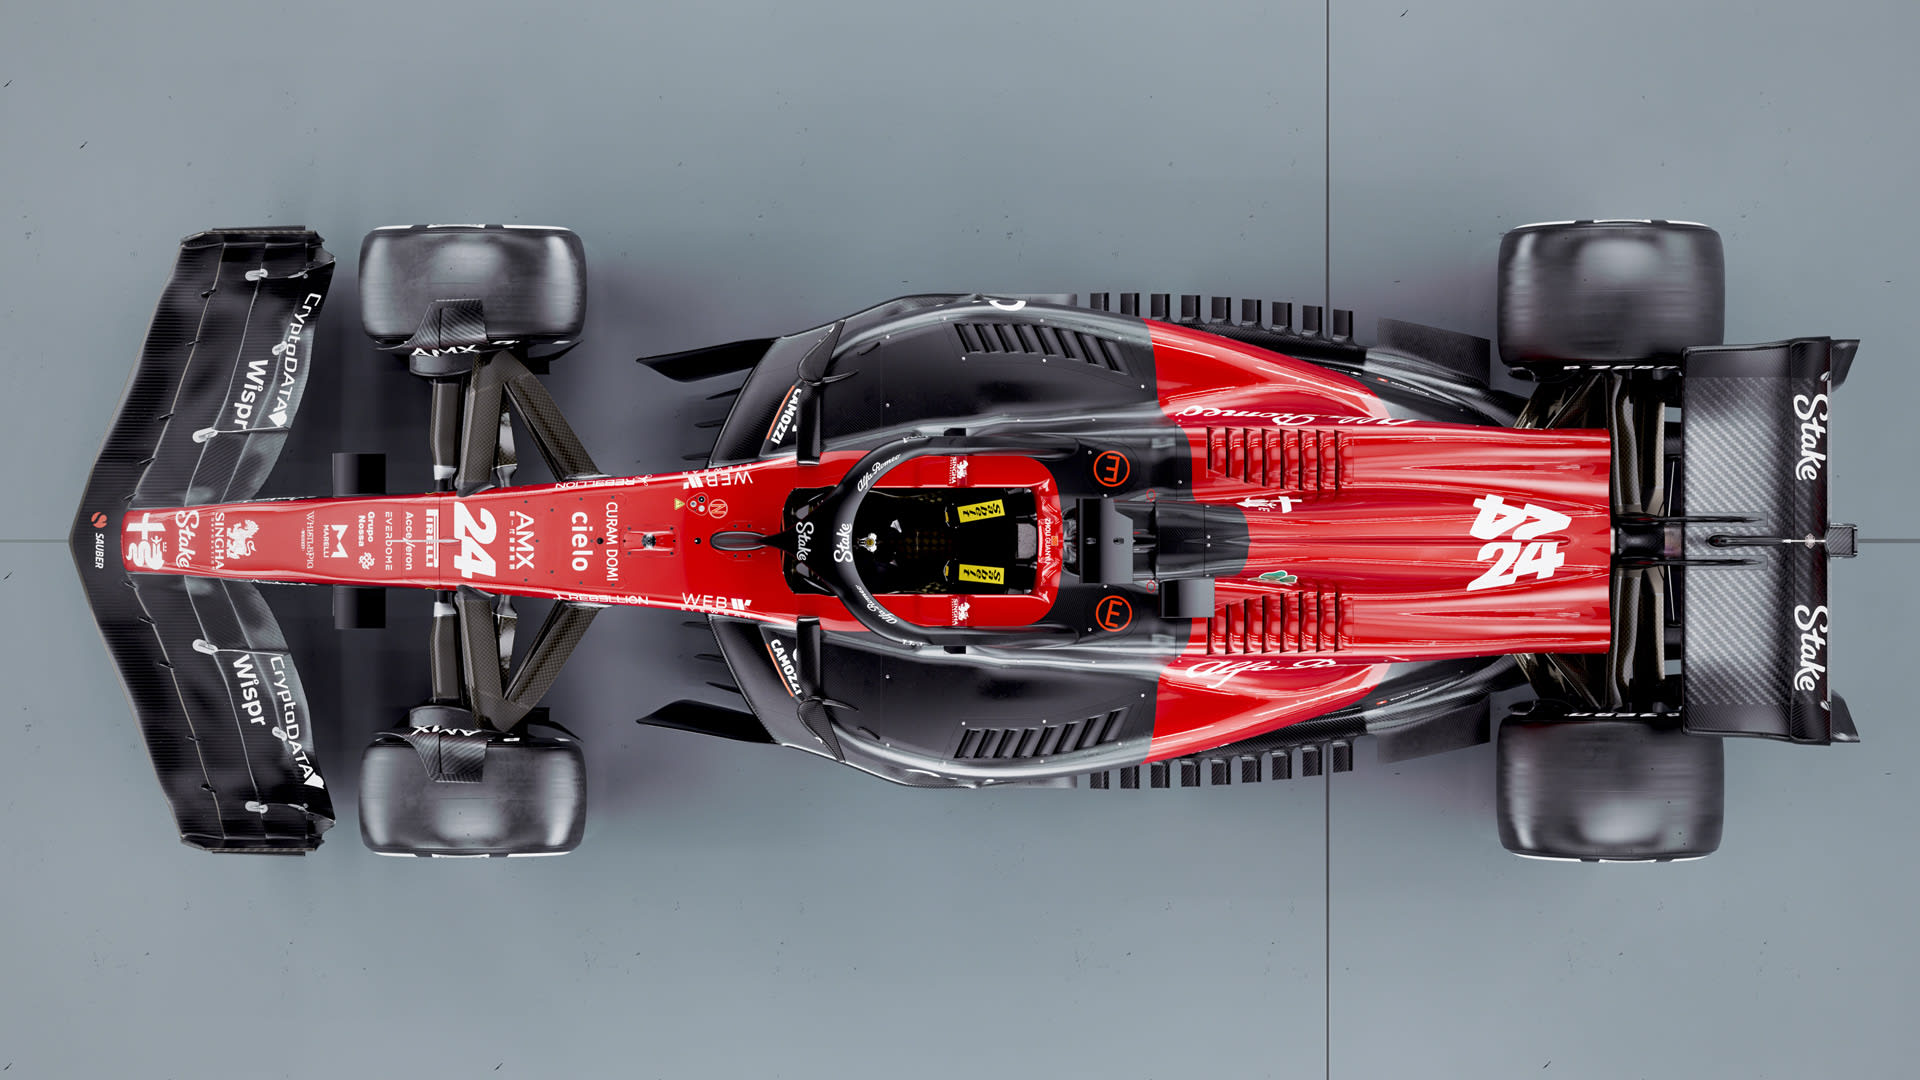 Ferrari target return to the top as they unveil car for 2022 F1